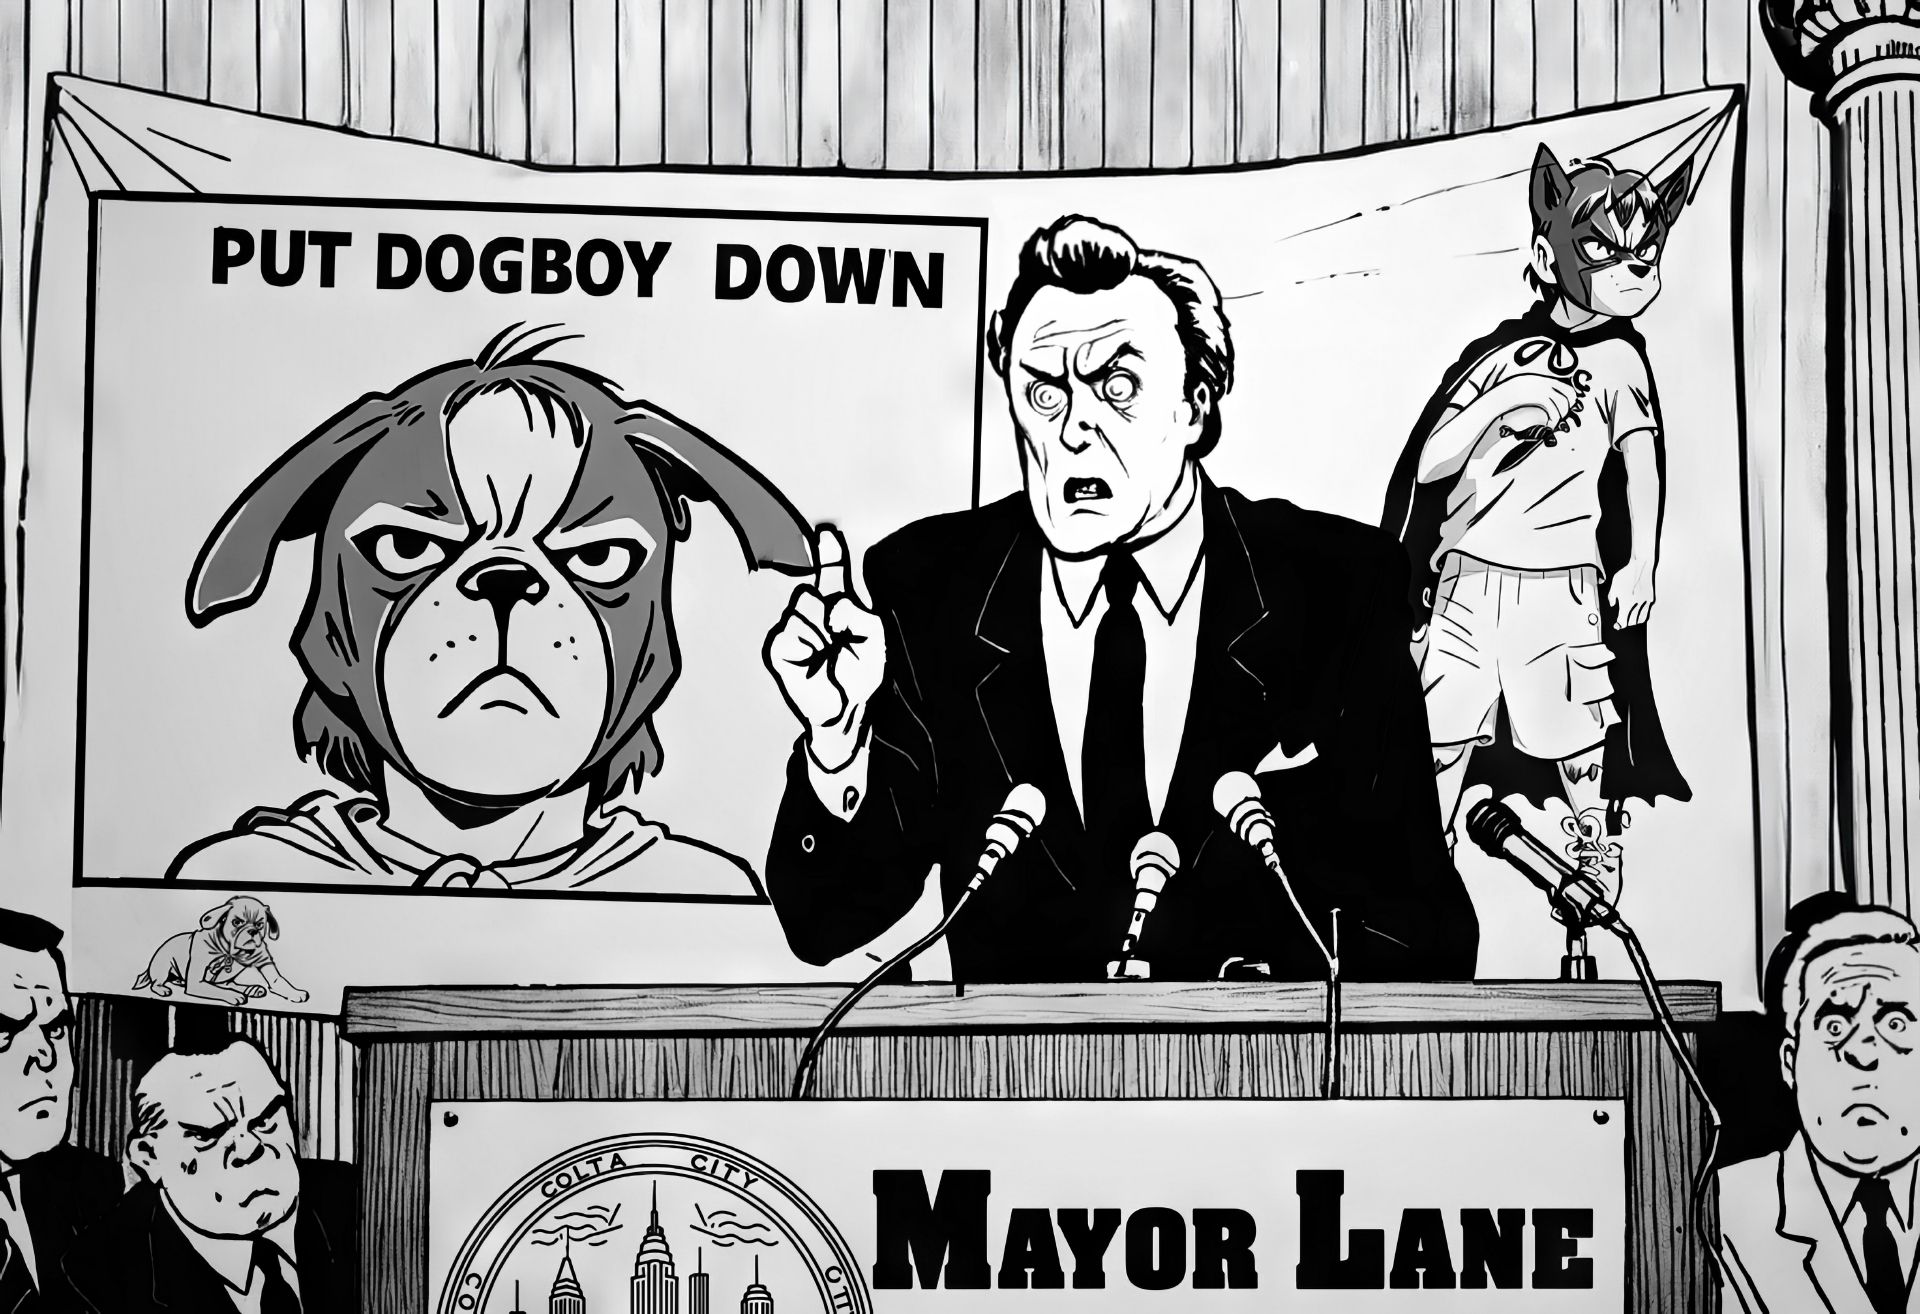 Mayor Lane launches a hunt for Dogboy!